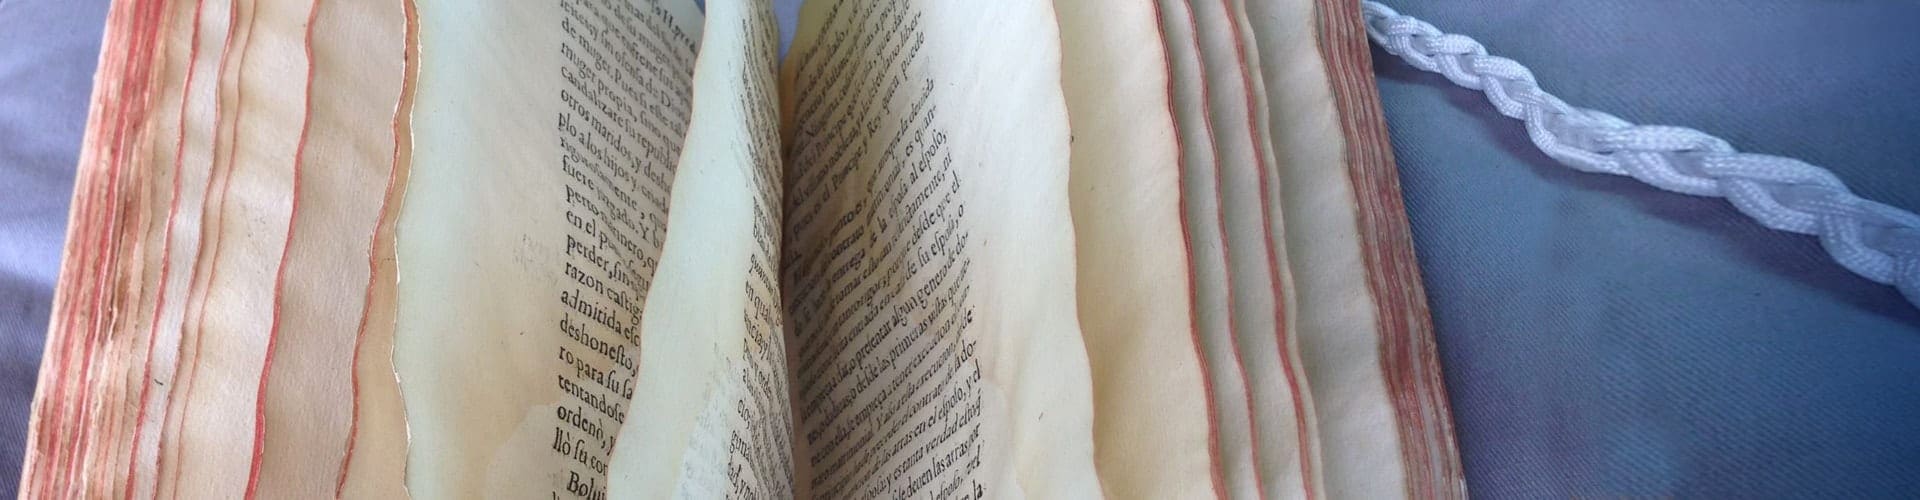 Consulting a 17th c. printed theological treatise in the fondo antiguo of the University of Seville library, Spain; June 2015